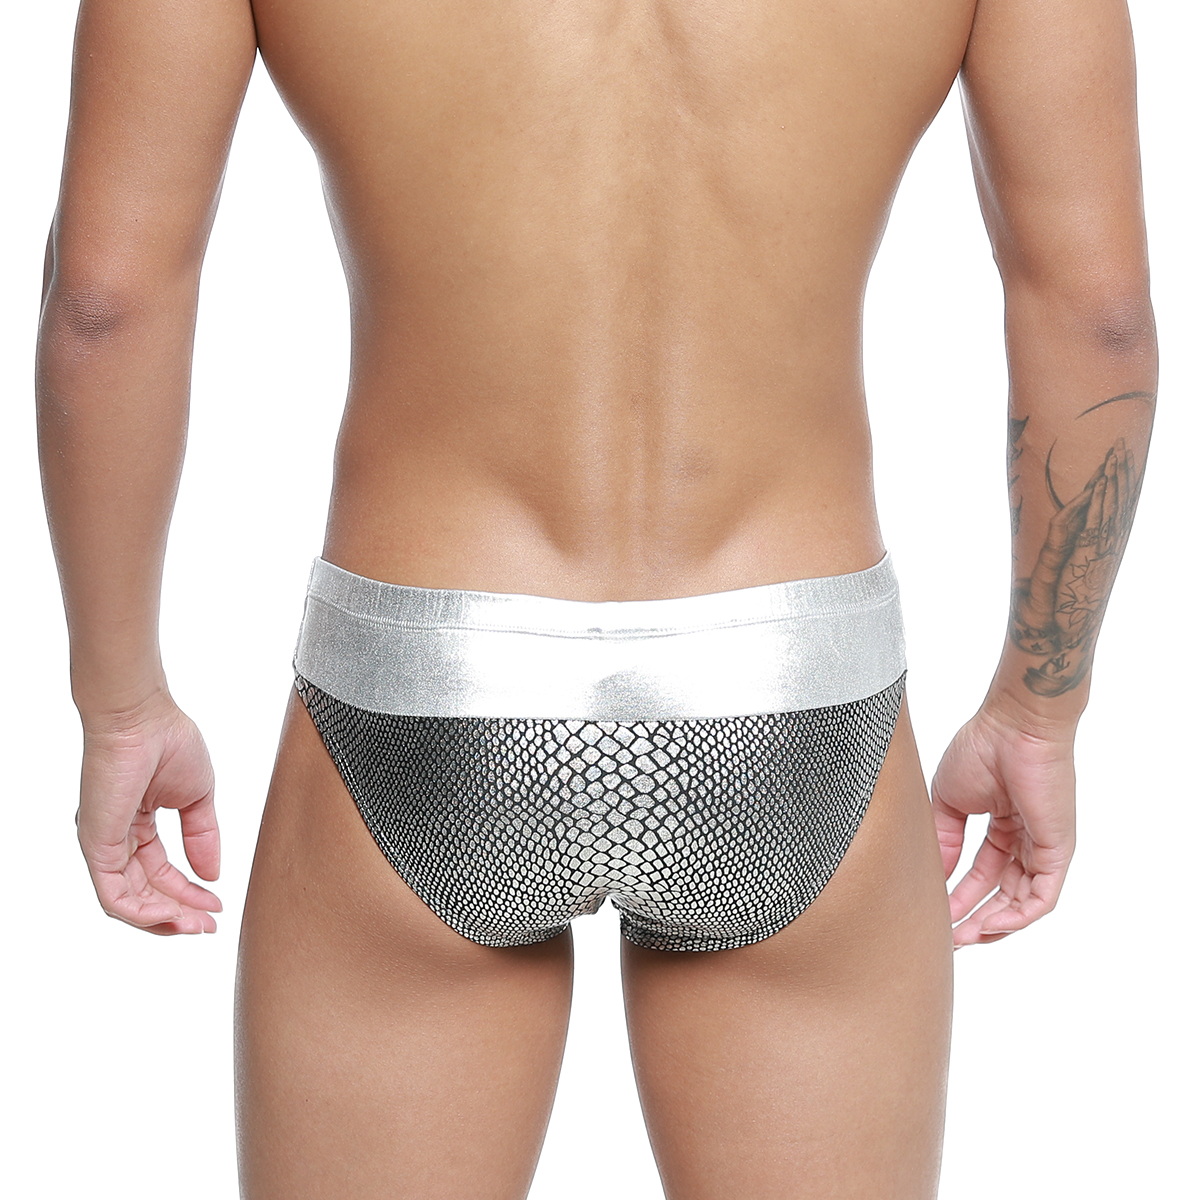 [MetroMuscleWear] Silver Snake Competition Suit (4974-10)